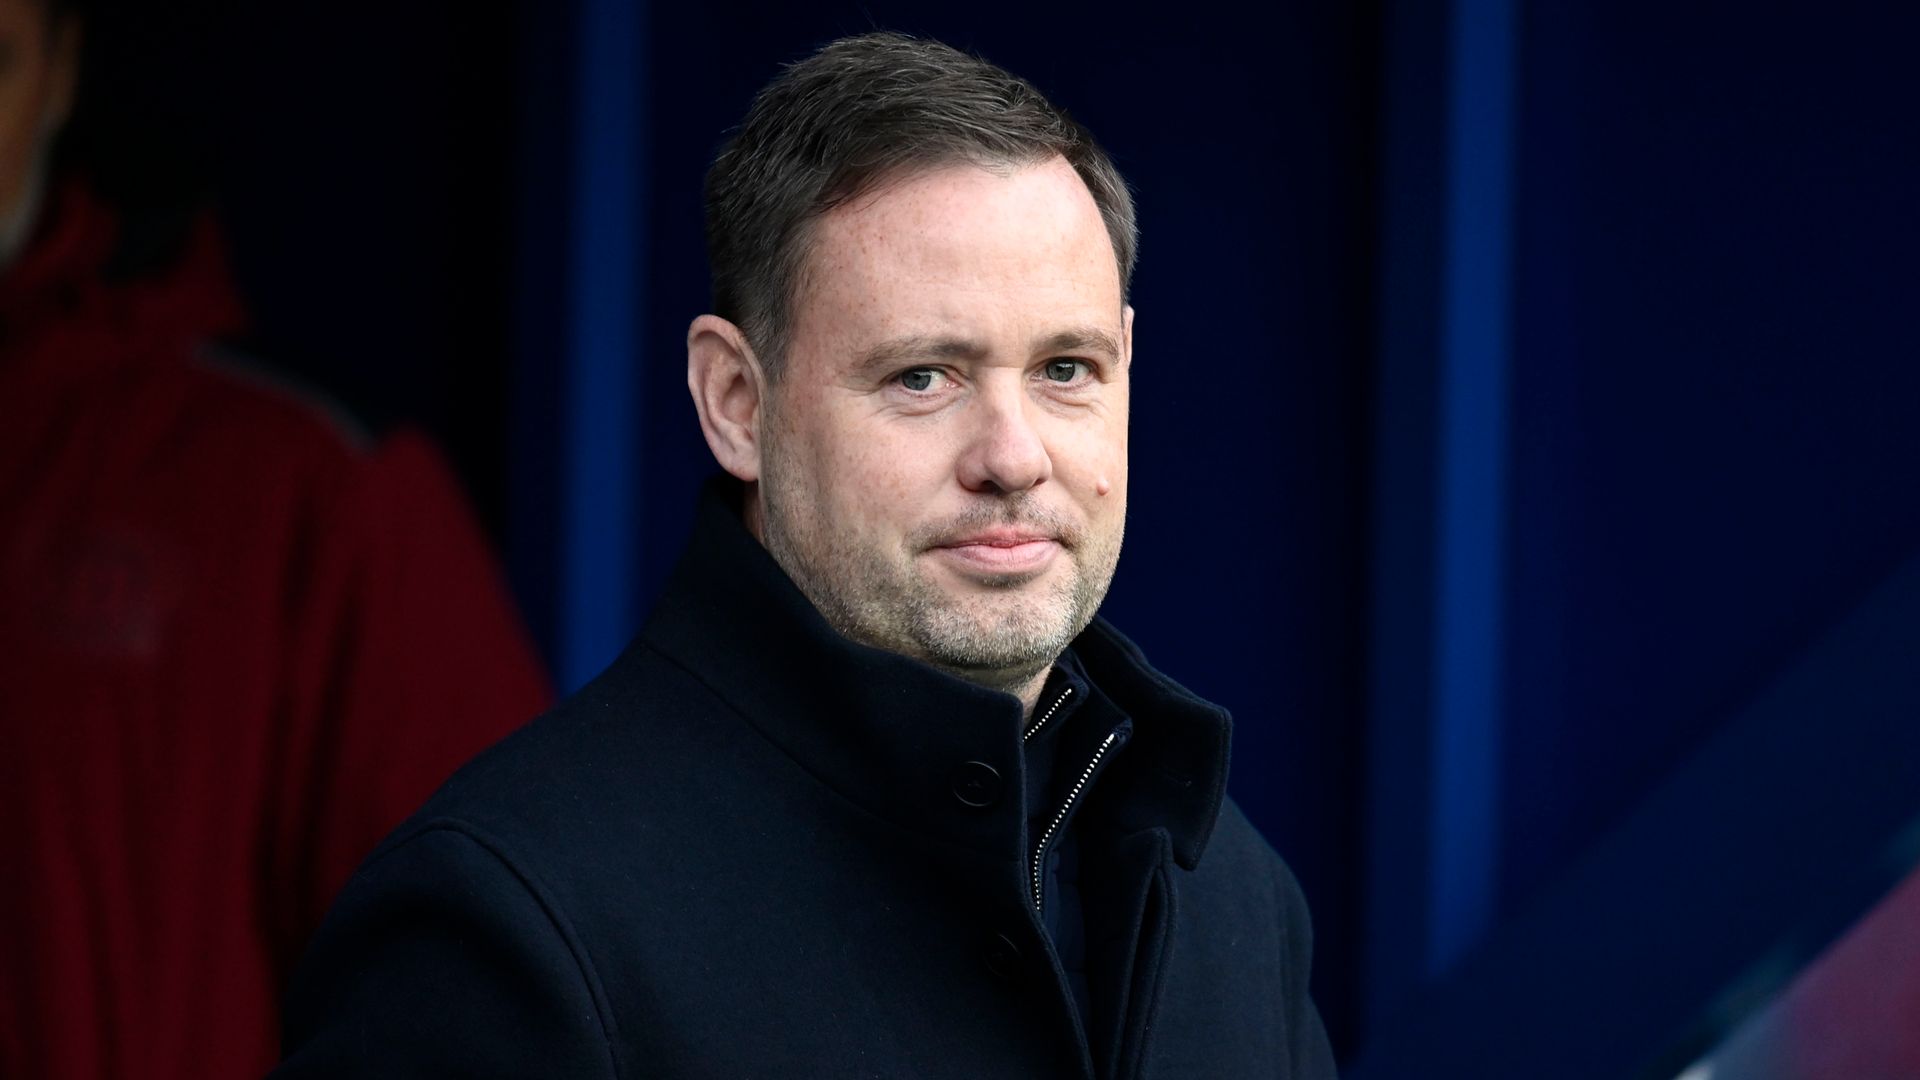 What has Beale changed at Rangers?